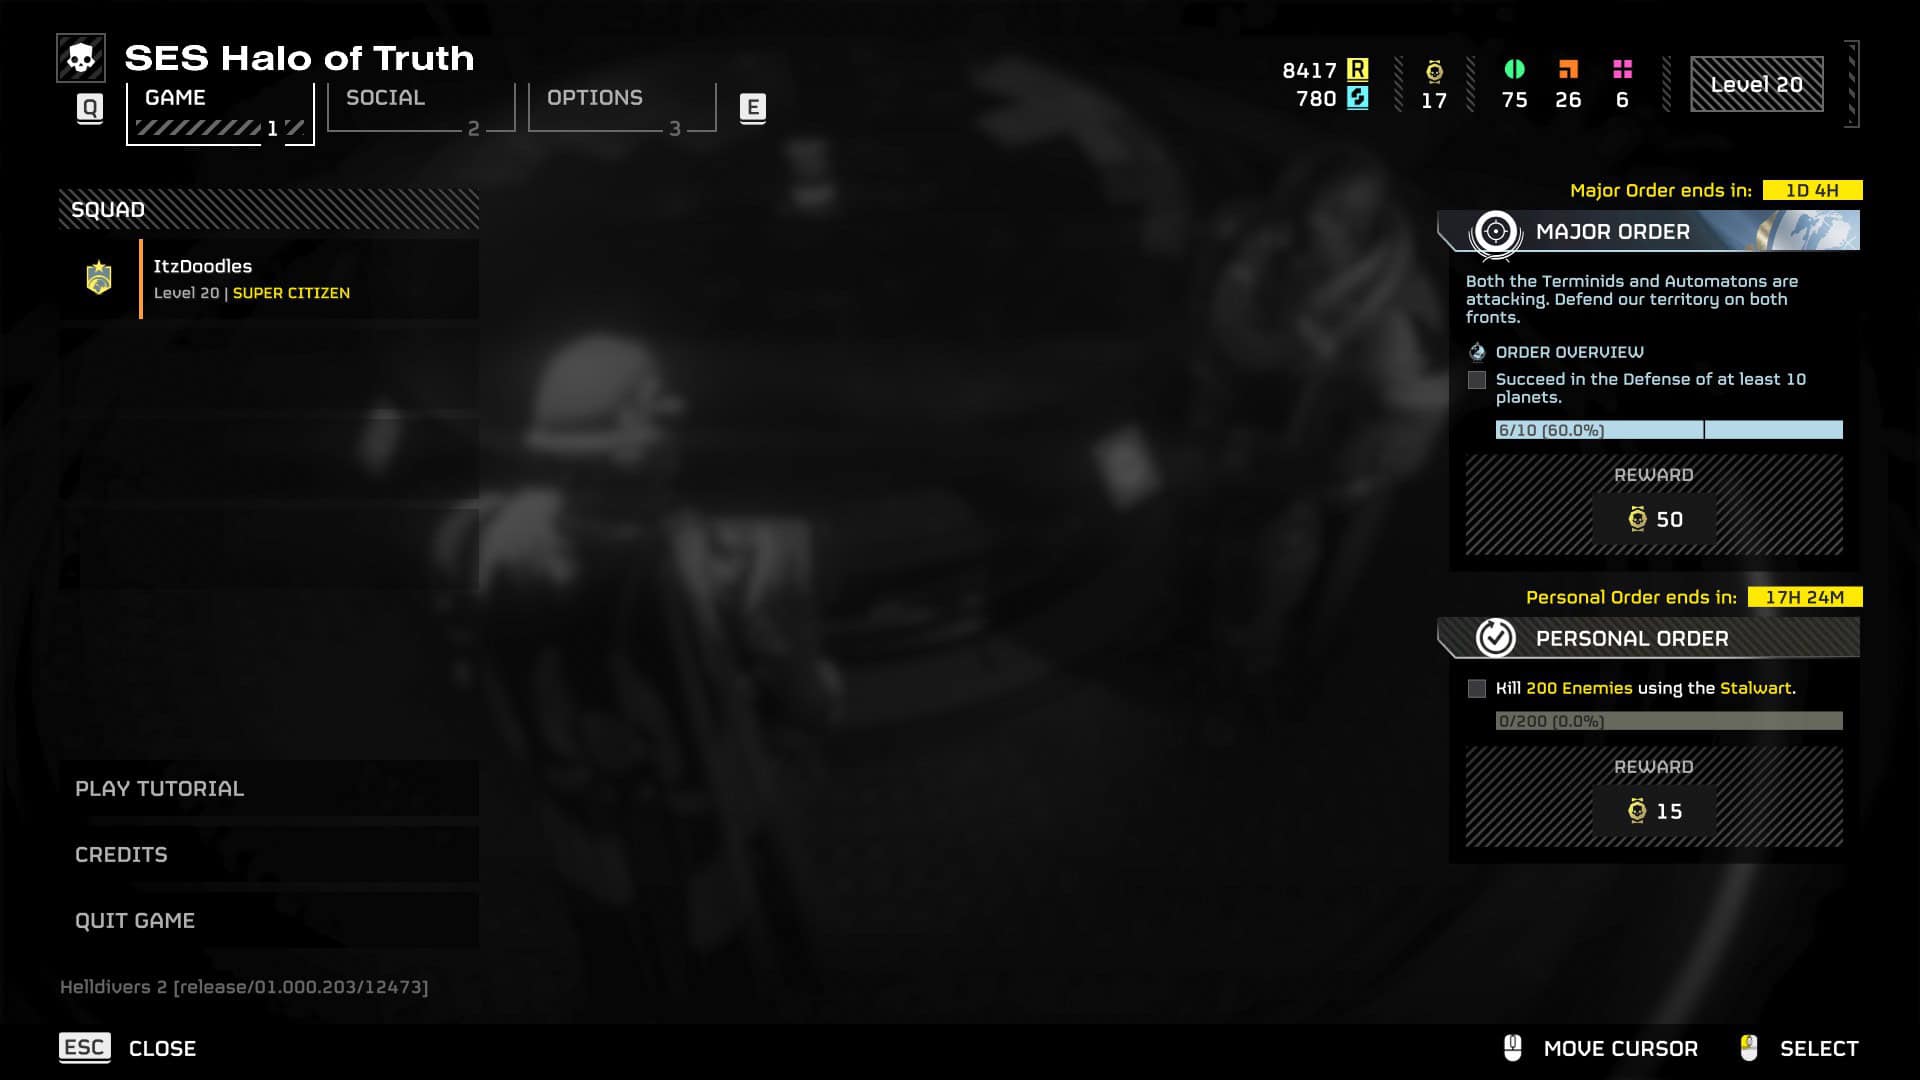 Screenshot of the "Helldivers 2" game interface showing the menu options such as social, options, and missions with various game statistics displayed.